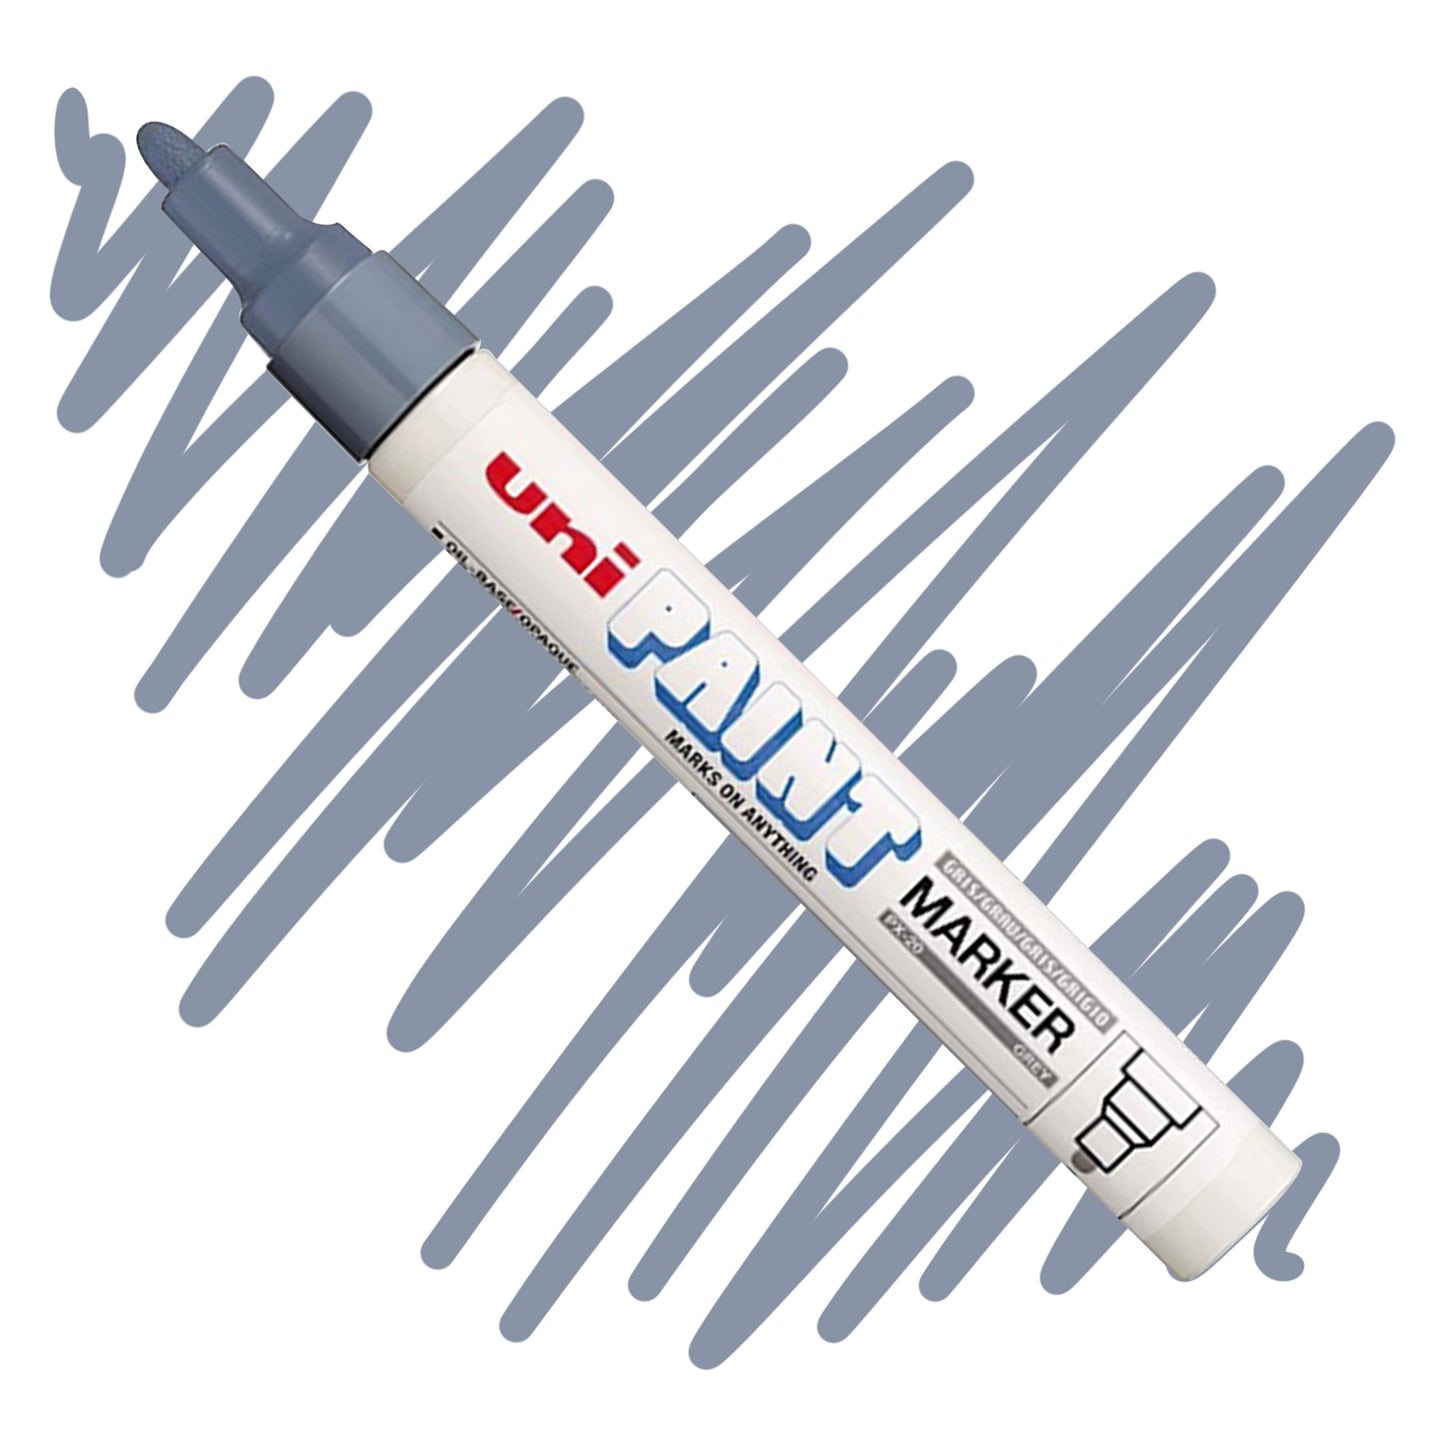 A white marker angled diagonally, the tip of the marker and the nib are colored grey. On the marker body the label reads "Uni PAINT Maker". Behind the marker is a color swatch of a squiggly line in grey..